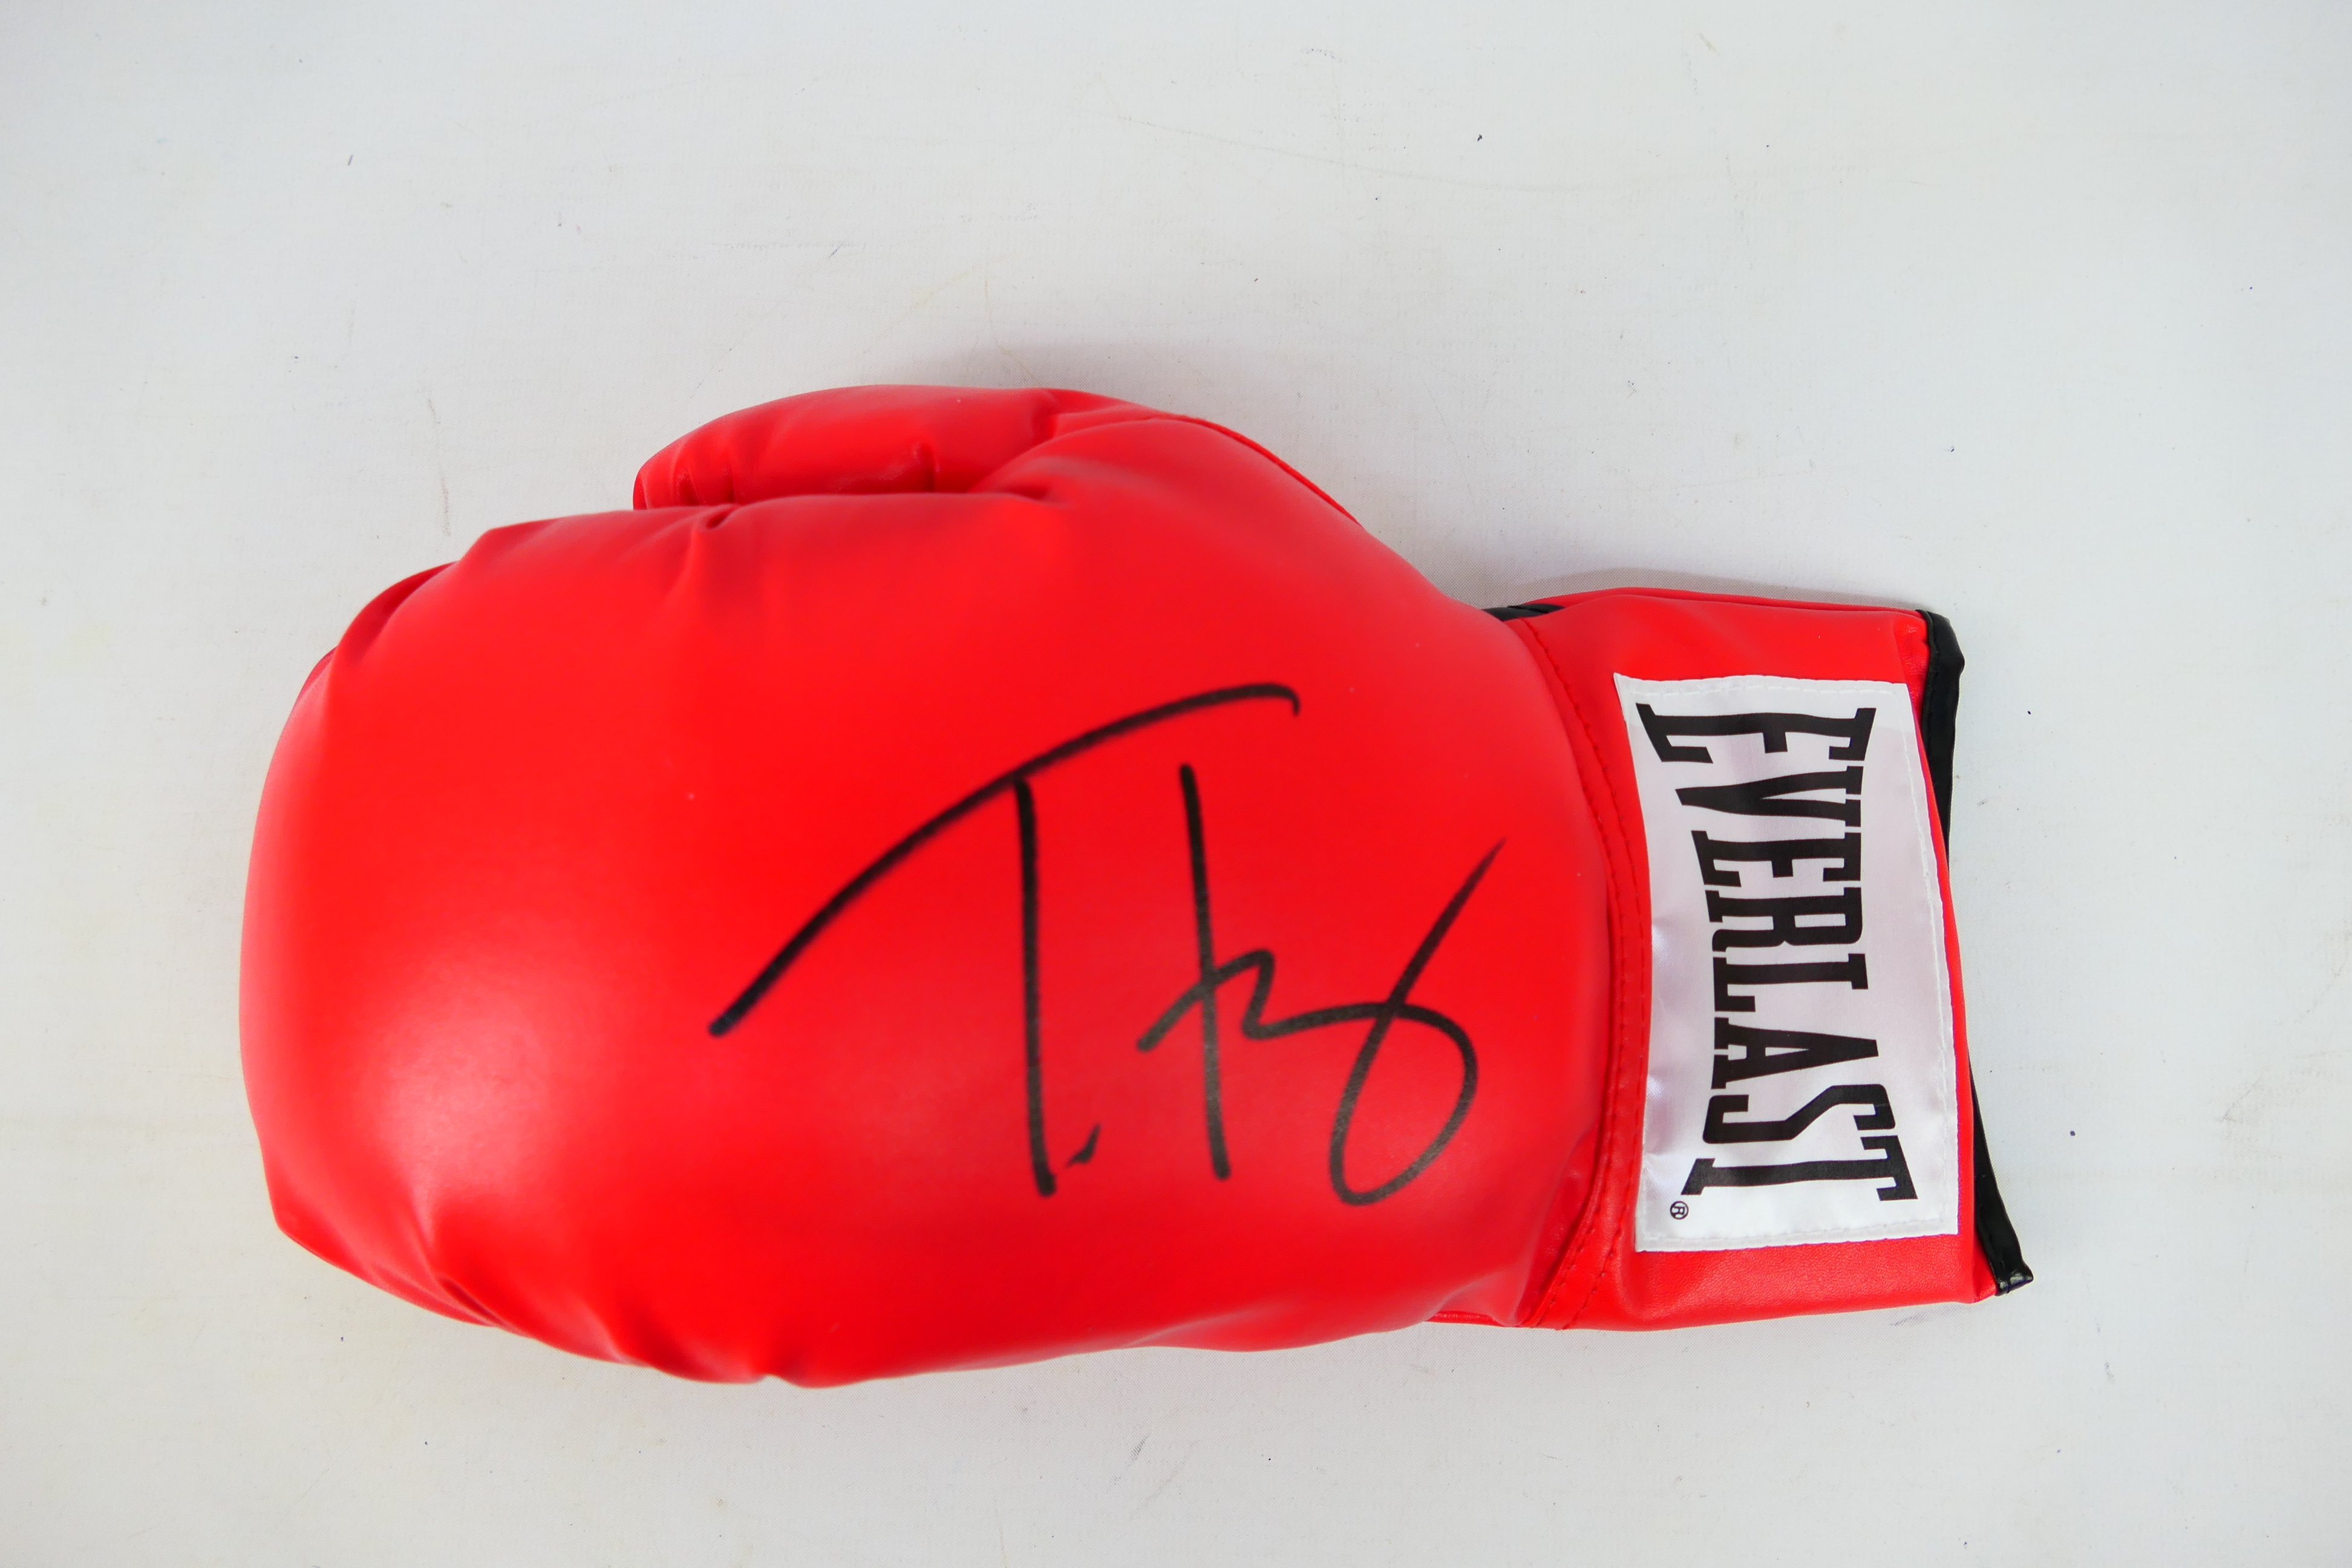 Boxing Interest - A red Everlast boxing glove signed by WBC Heavyweight Champion Tyson Fury,